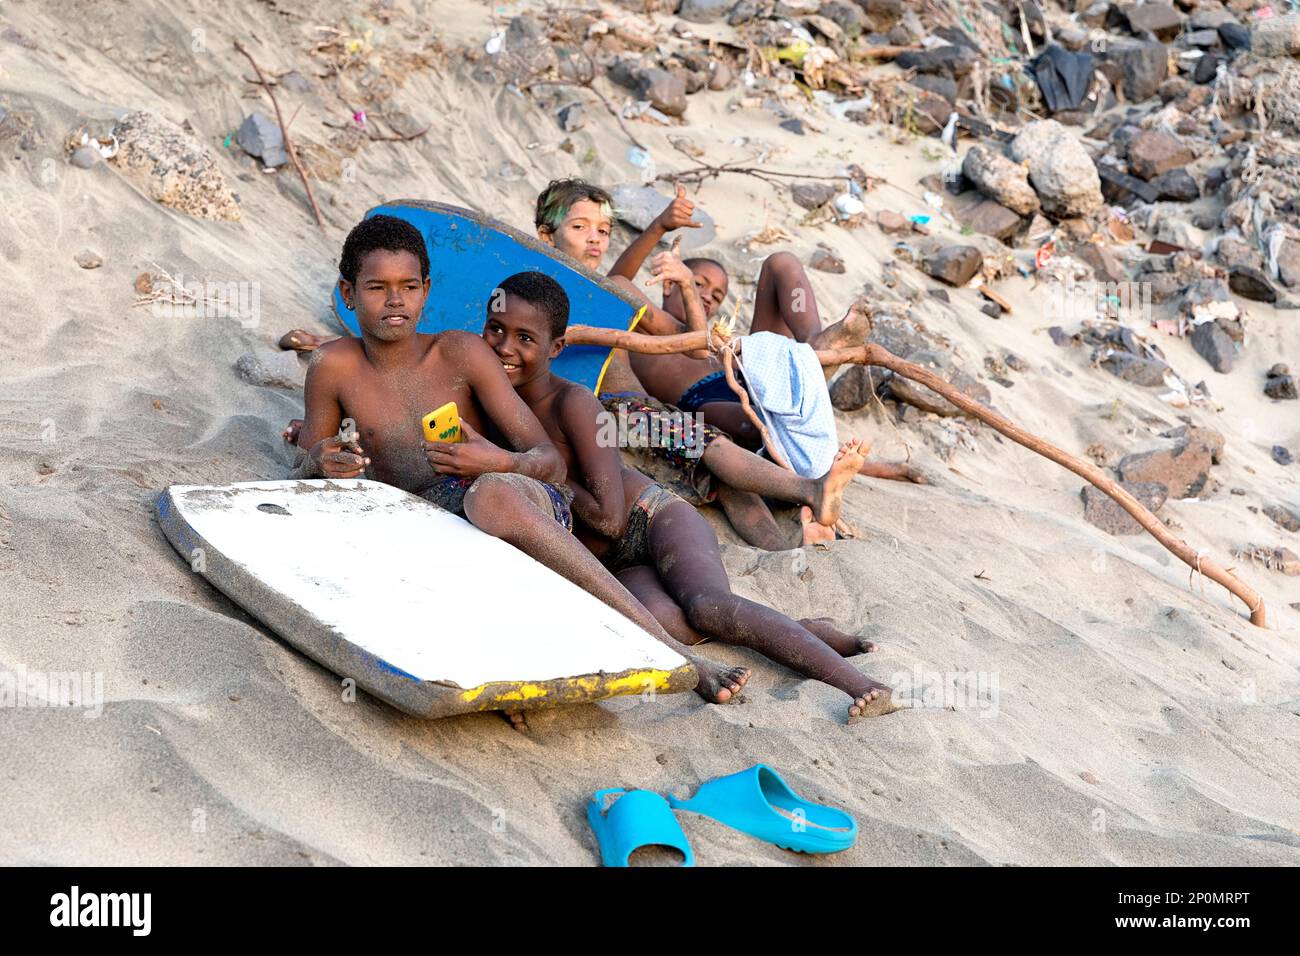 Local boys relaxing on the beach with their boogie boards, on the beach of Sao pedro, sandy beach close to Mindelo on Sao VIcente island, Cabo verde Stock Photo